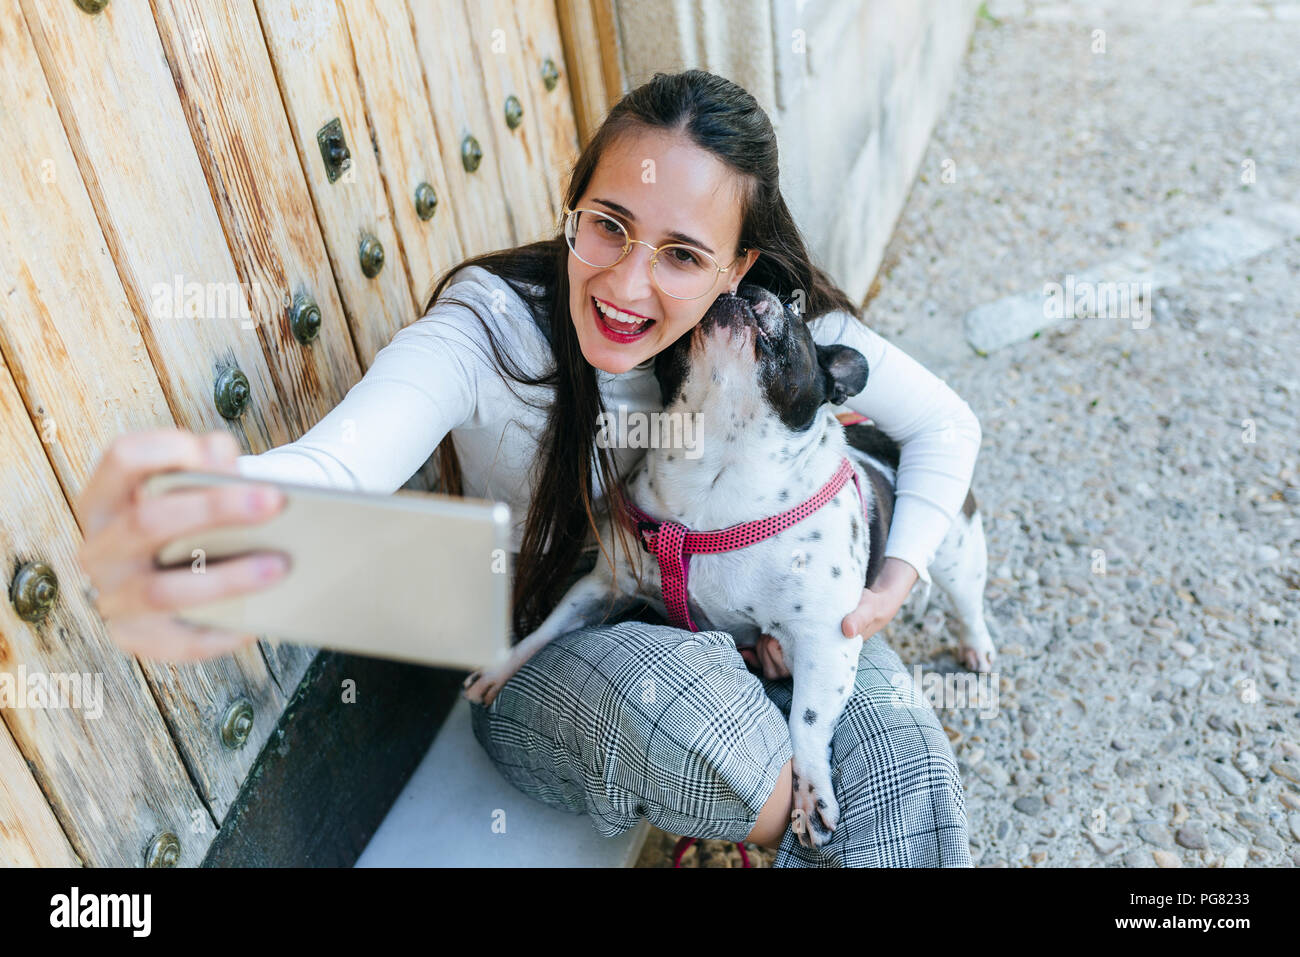 Young woman using smartphone, taking a selfie with her dog Stock Photo